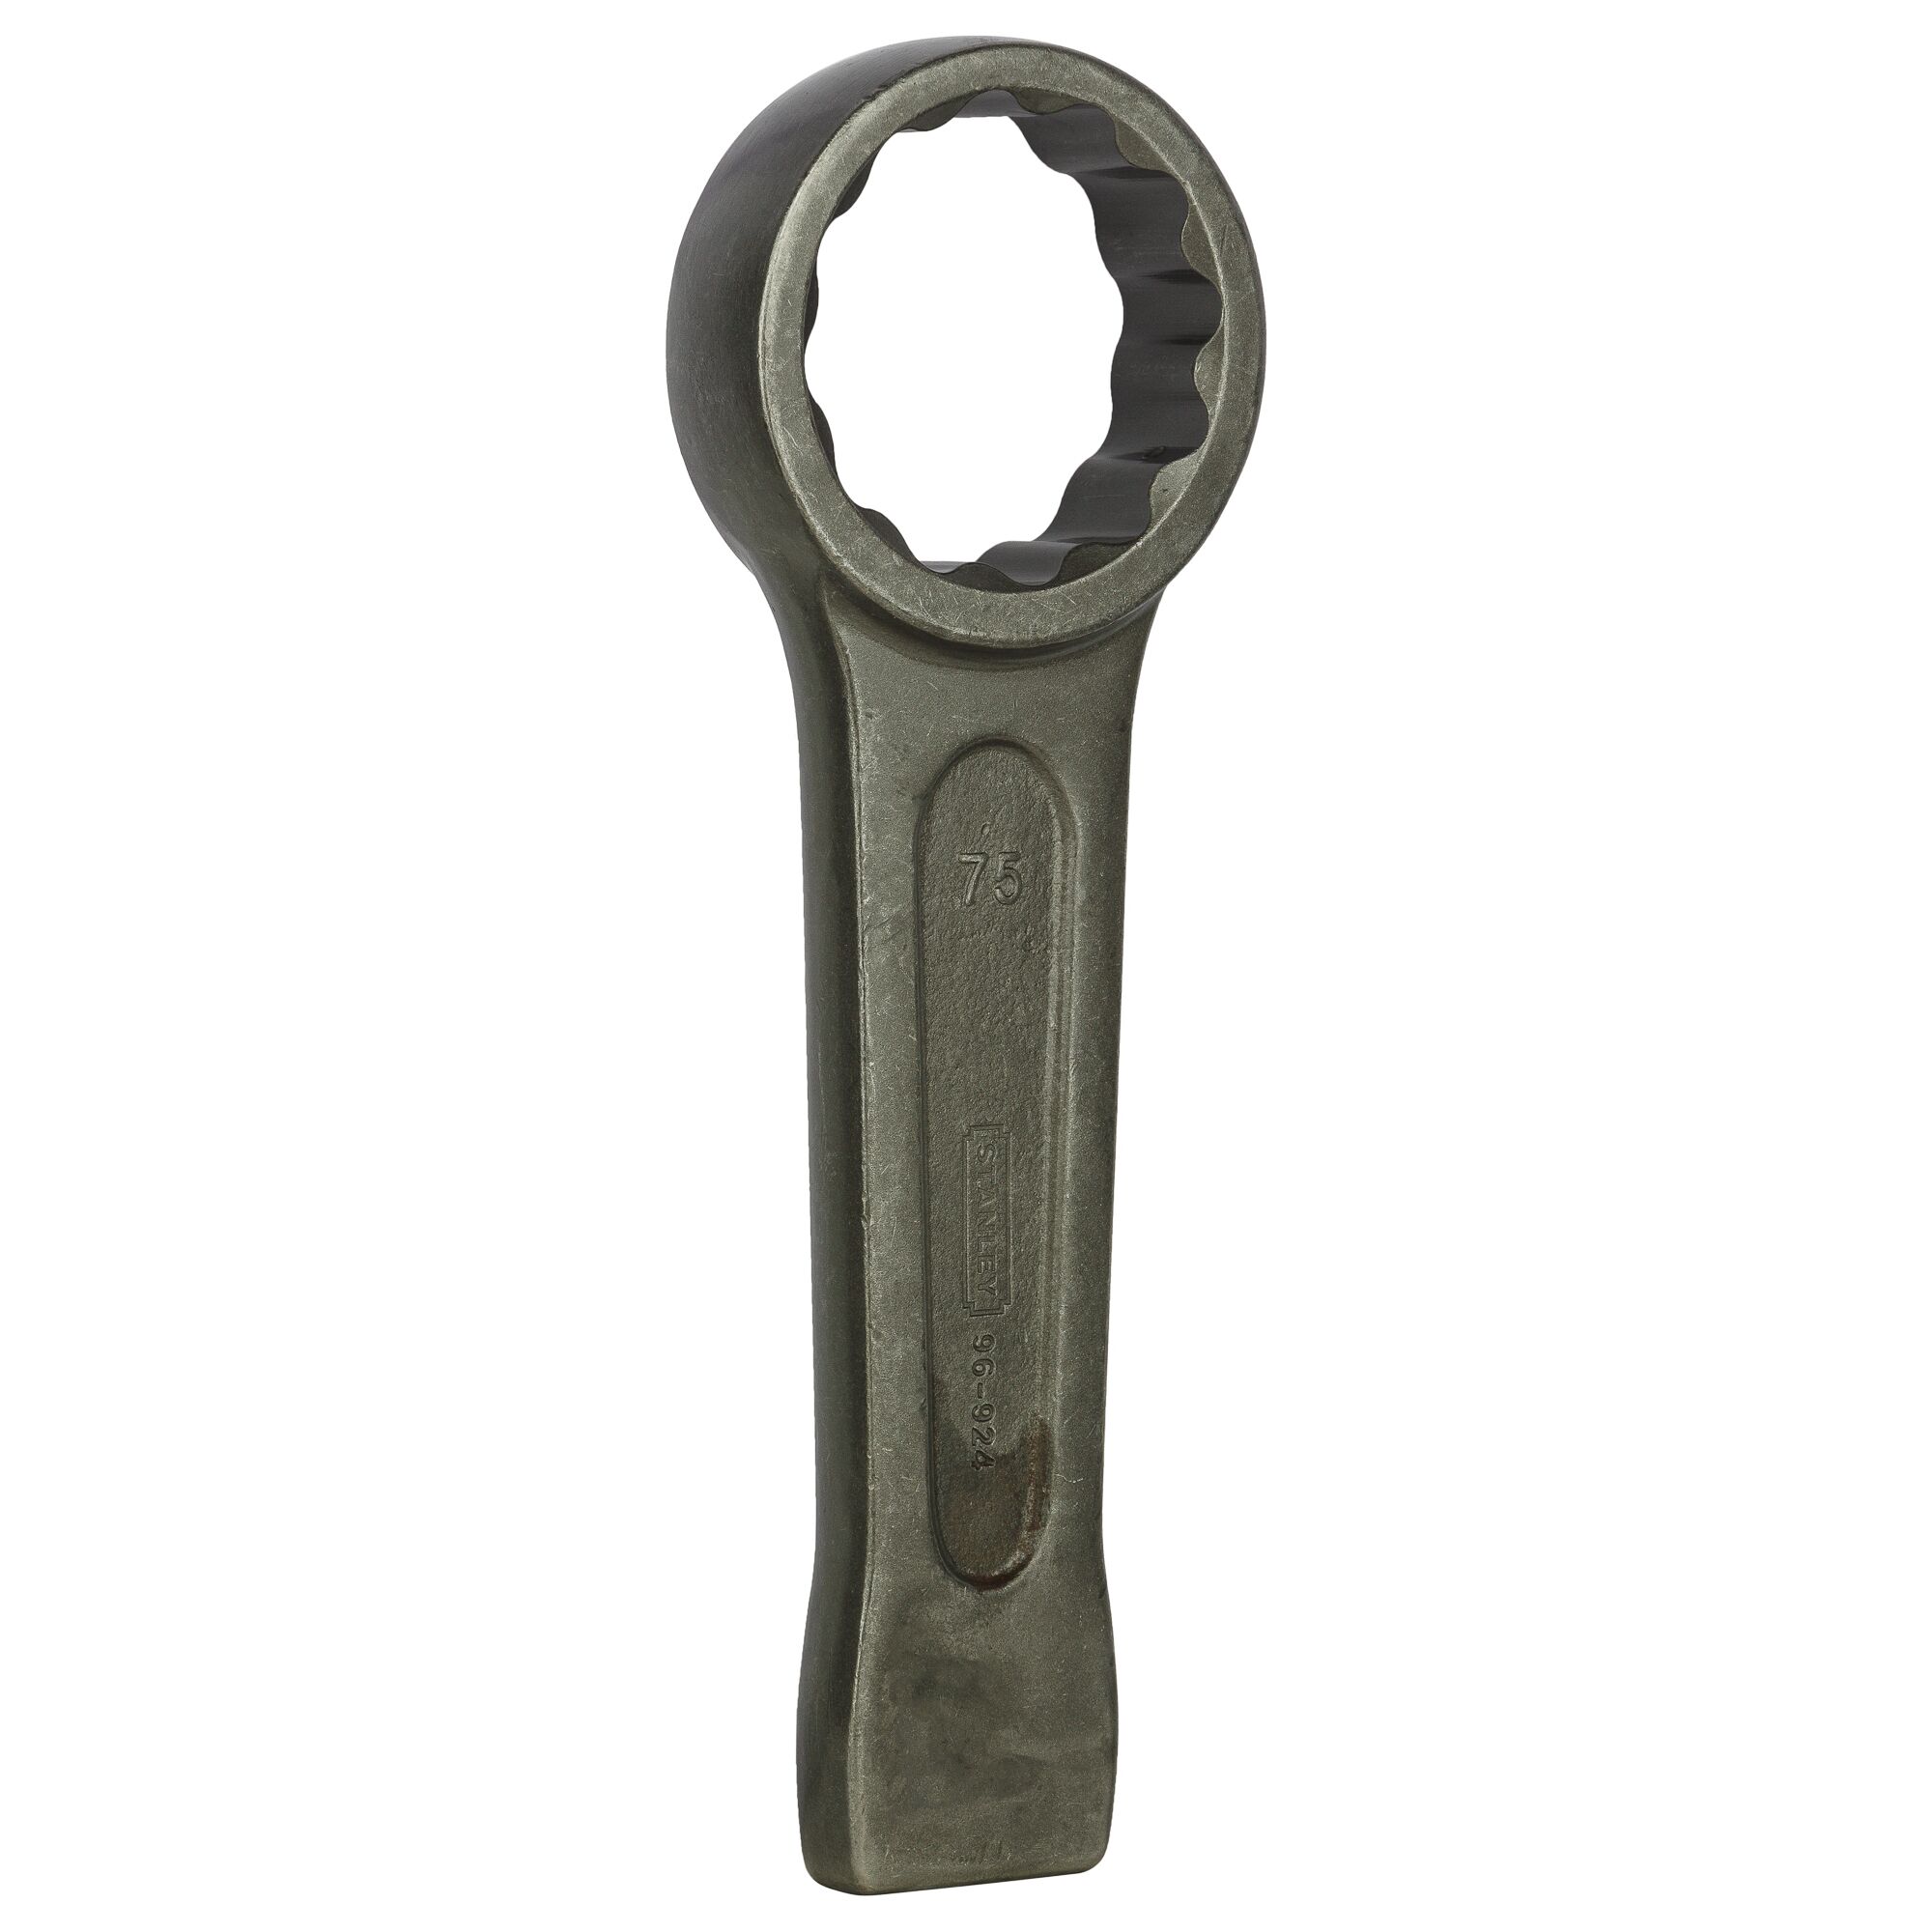 Slogging spanner 120mm KING TONY Industrial quality - Robson's Tool King  Store